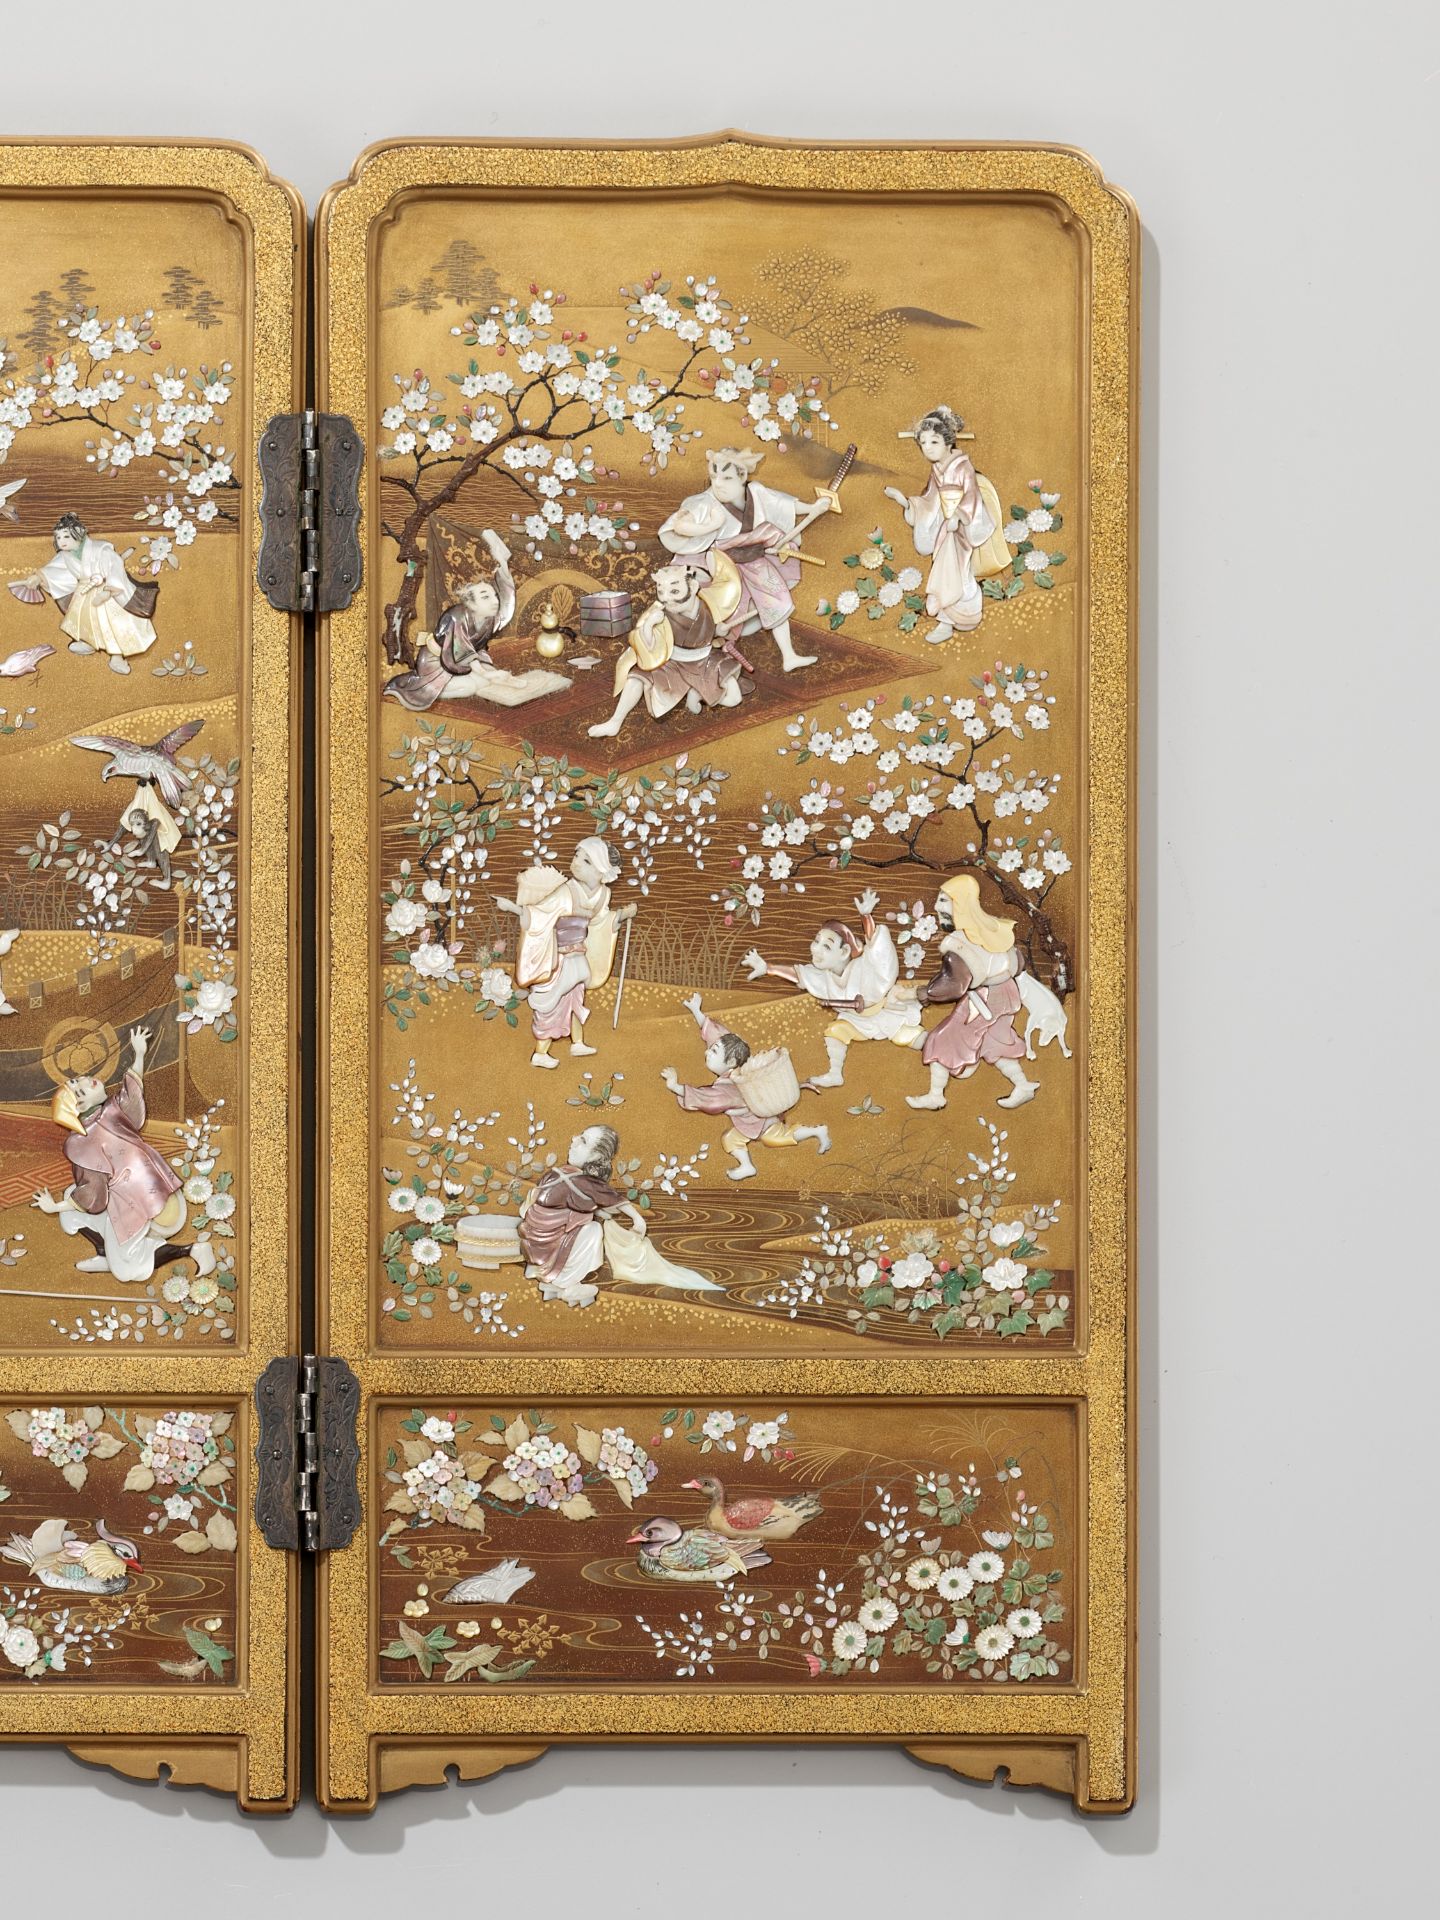 A RARE AND SUPERB SHIBAYAMA-STYLE INLAID GOLD LACQUER TABLE SCREEN WITH KYOSAI'S ANIMAL CIRCUS - Bild 11 aus 11